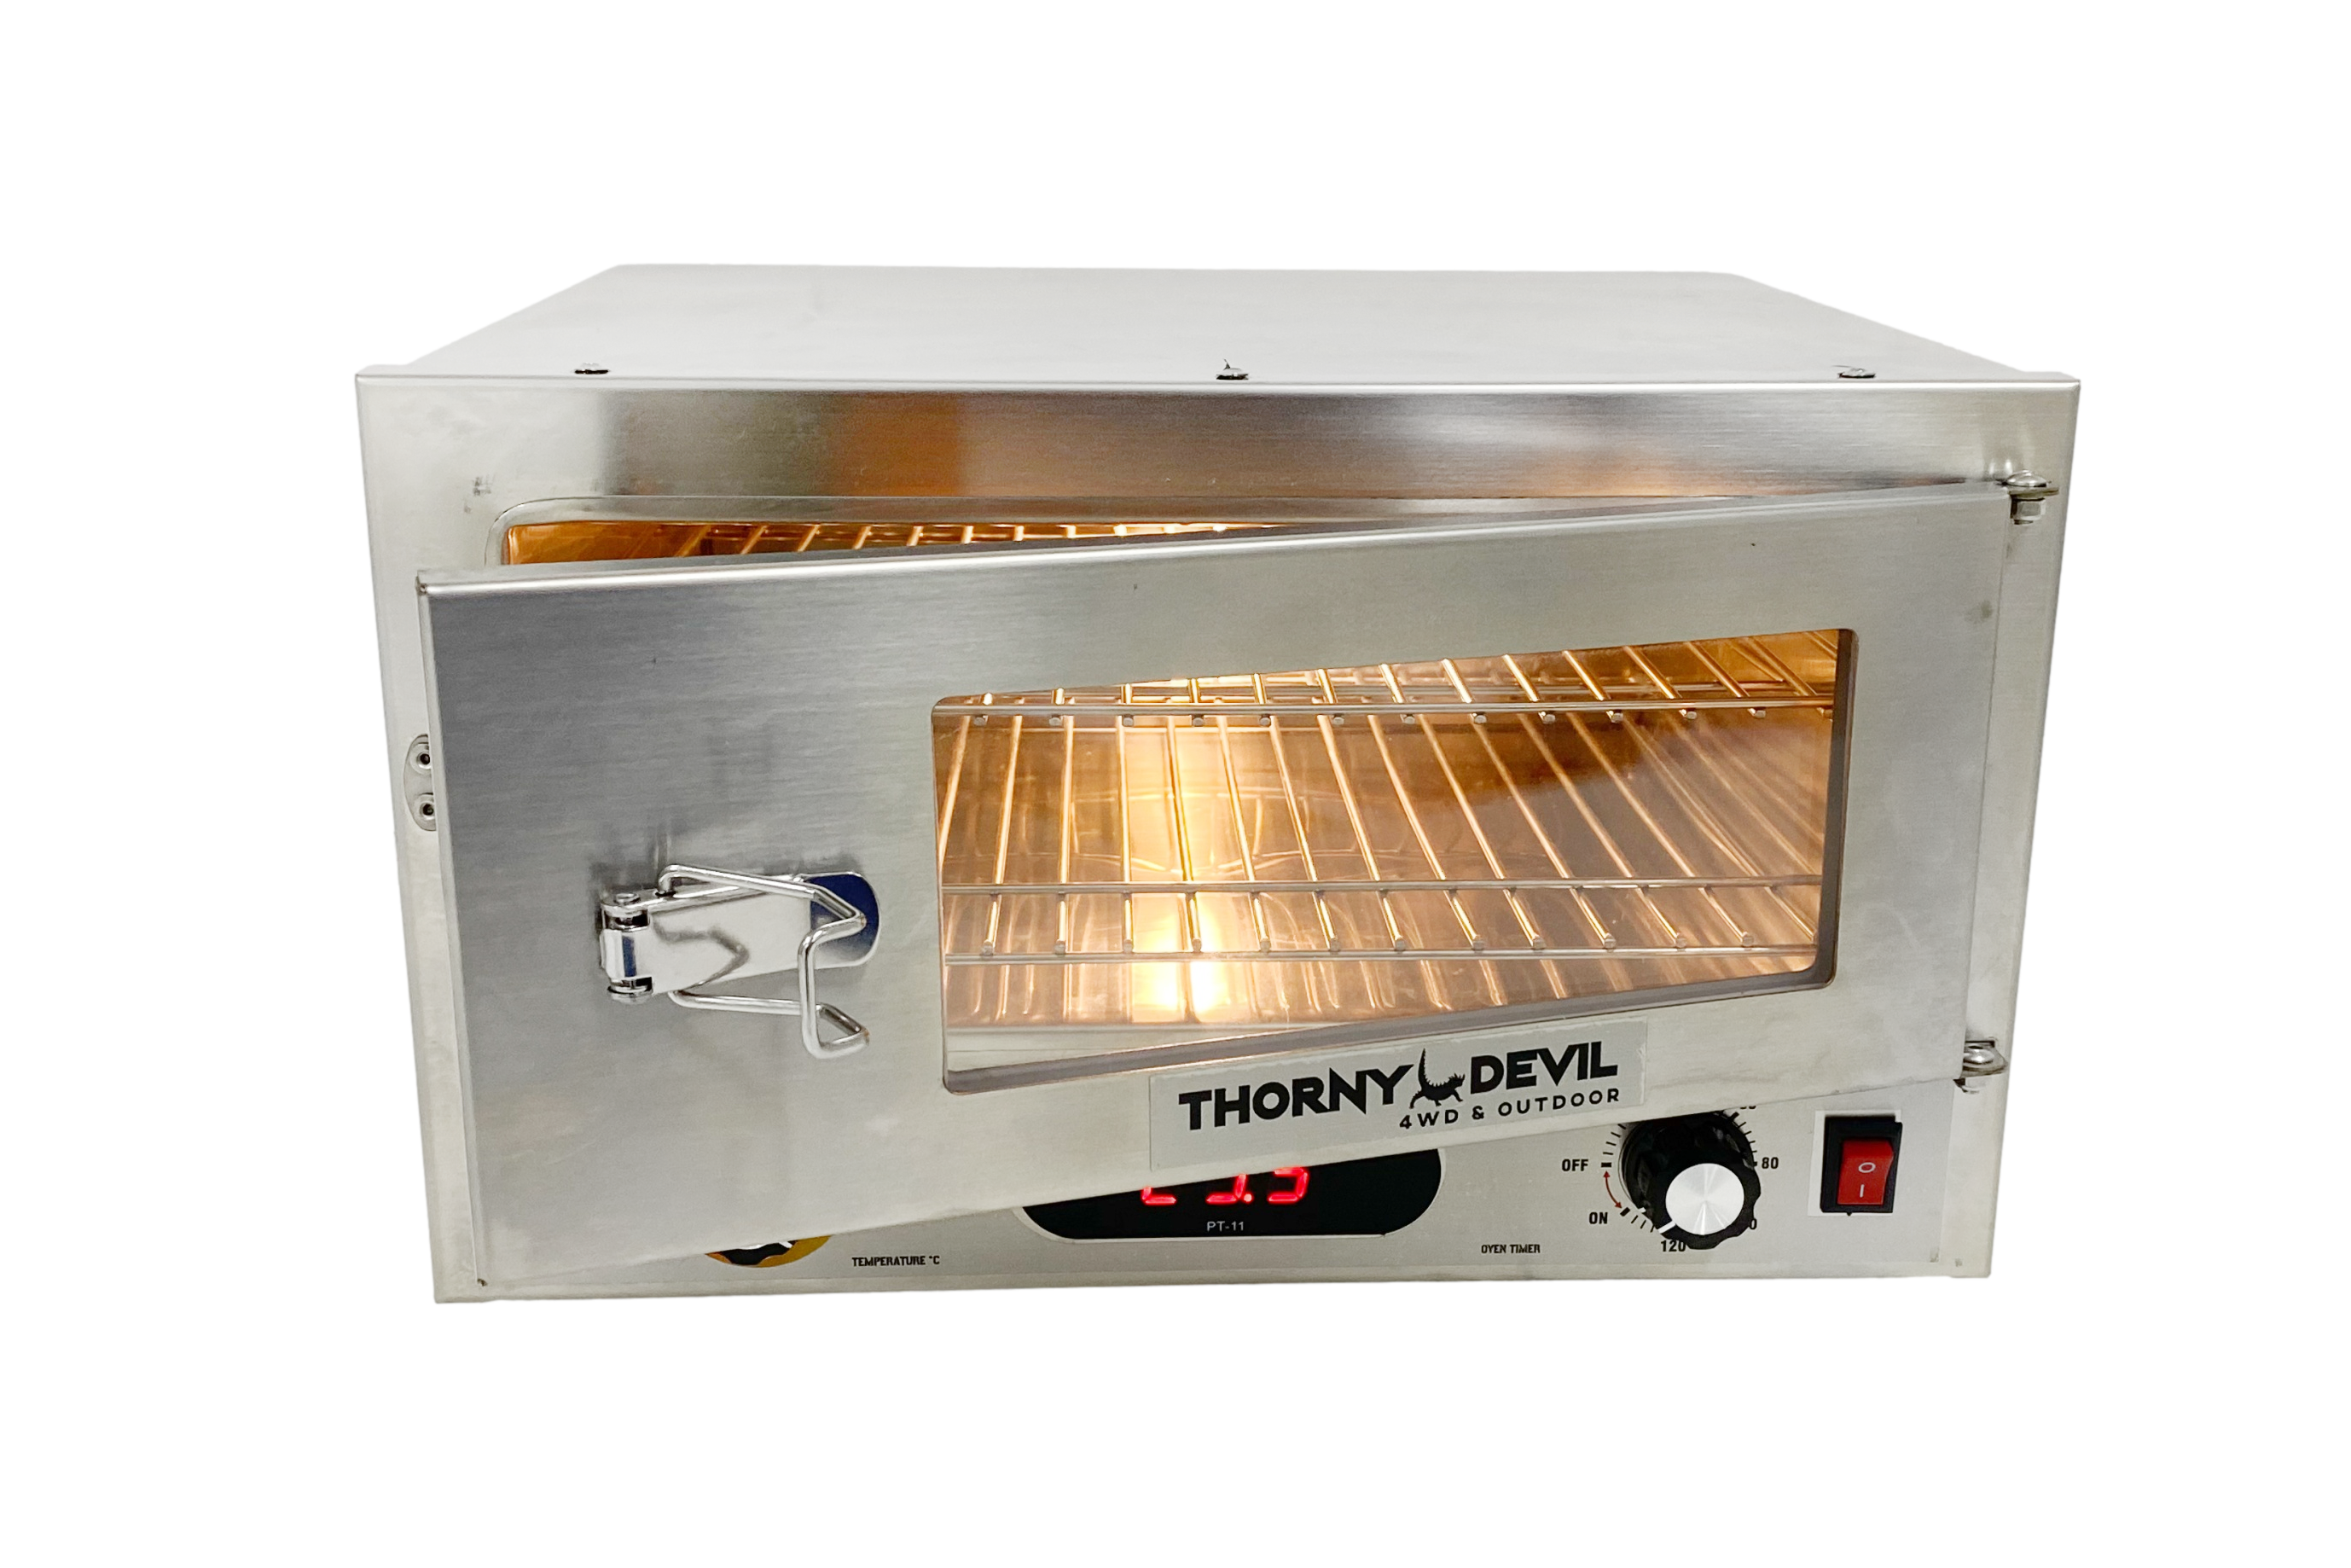 Thorny Devil™ 12V Digital Camping 4WD Travel Oven with Timer (Stainless Steel Casing & Fibreglass Insulation)